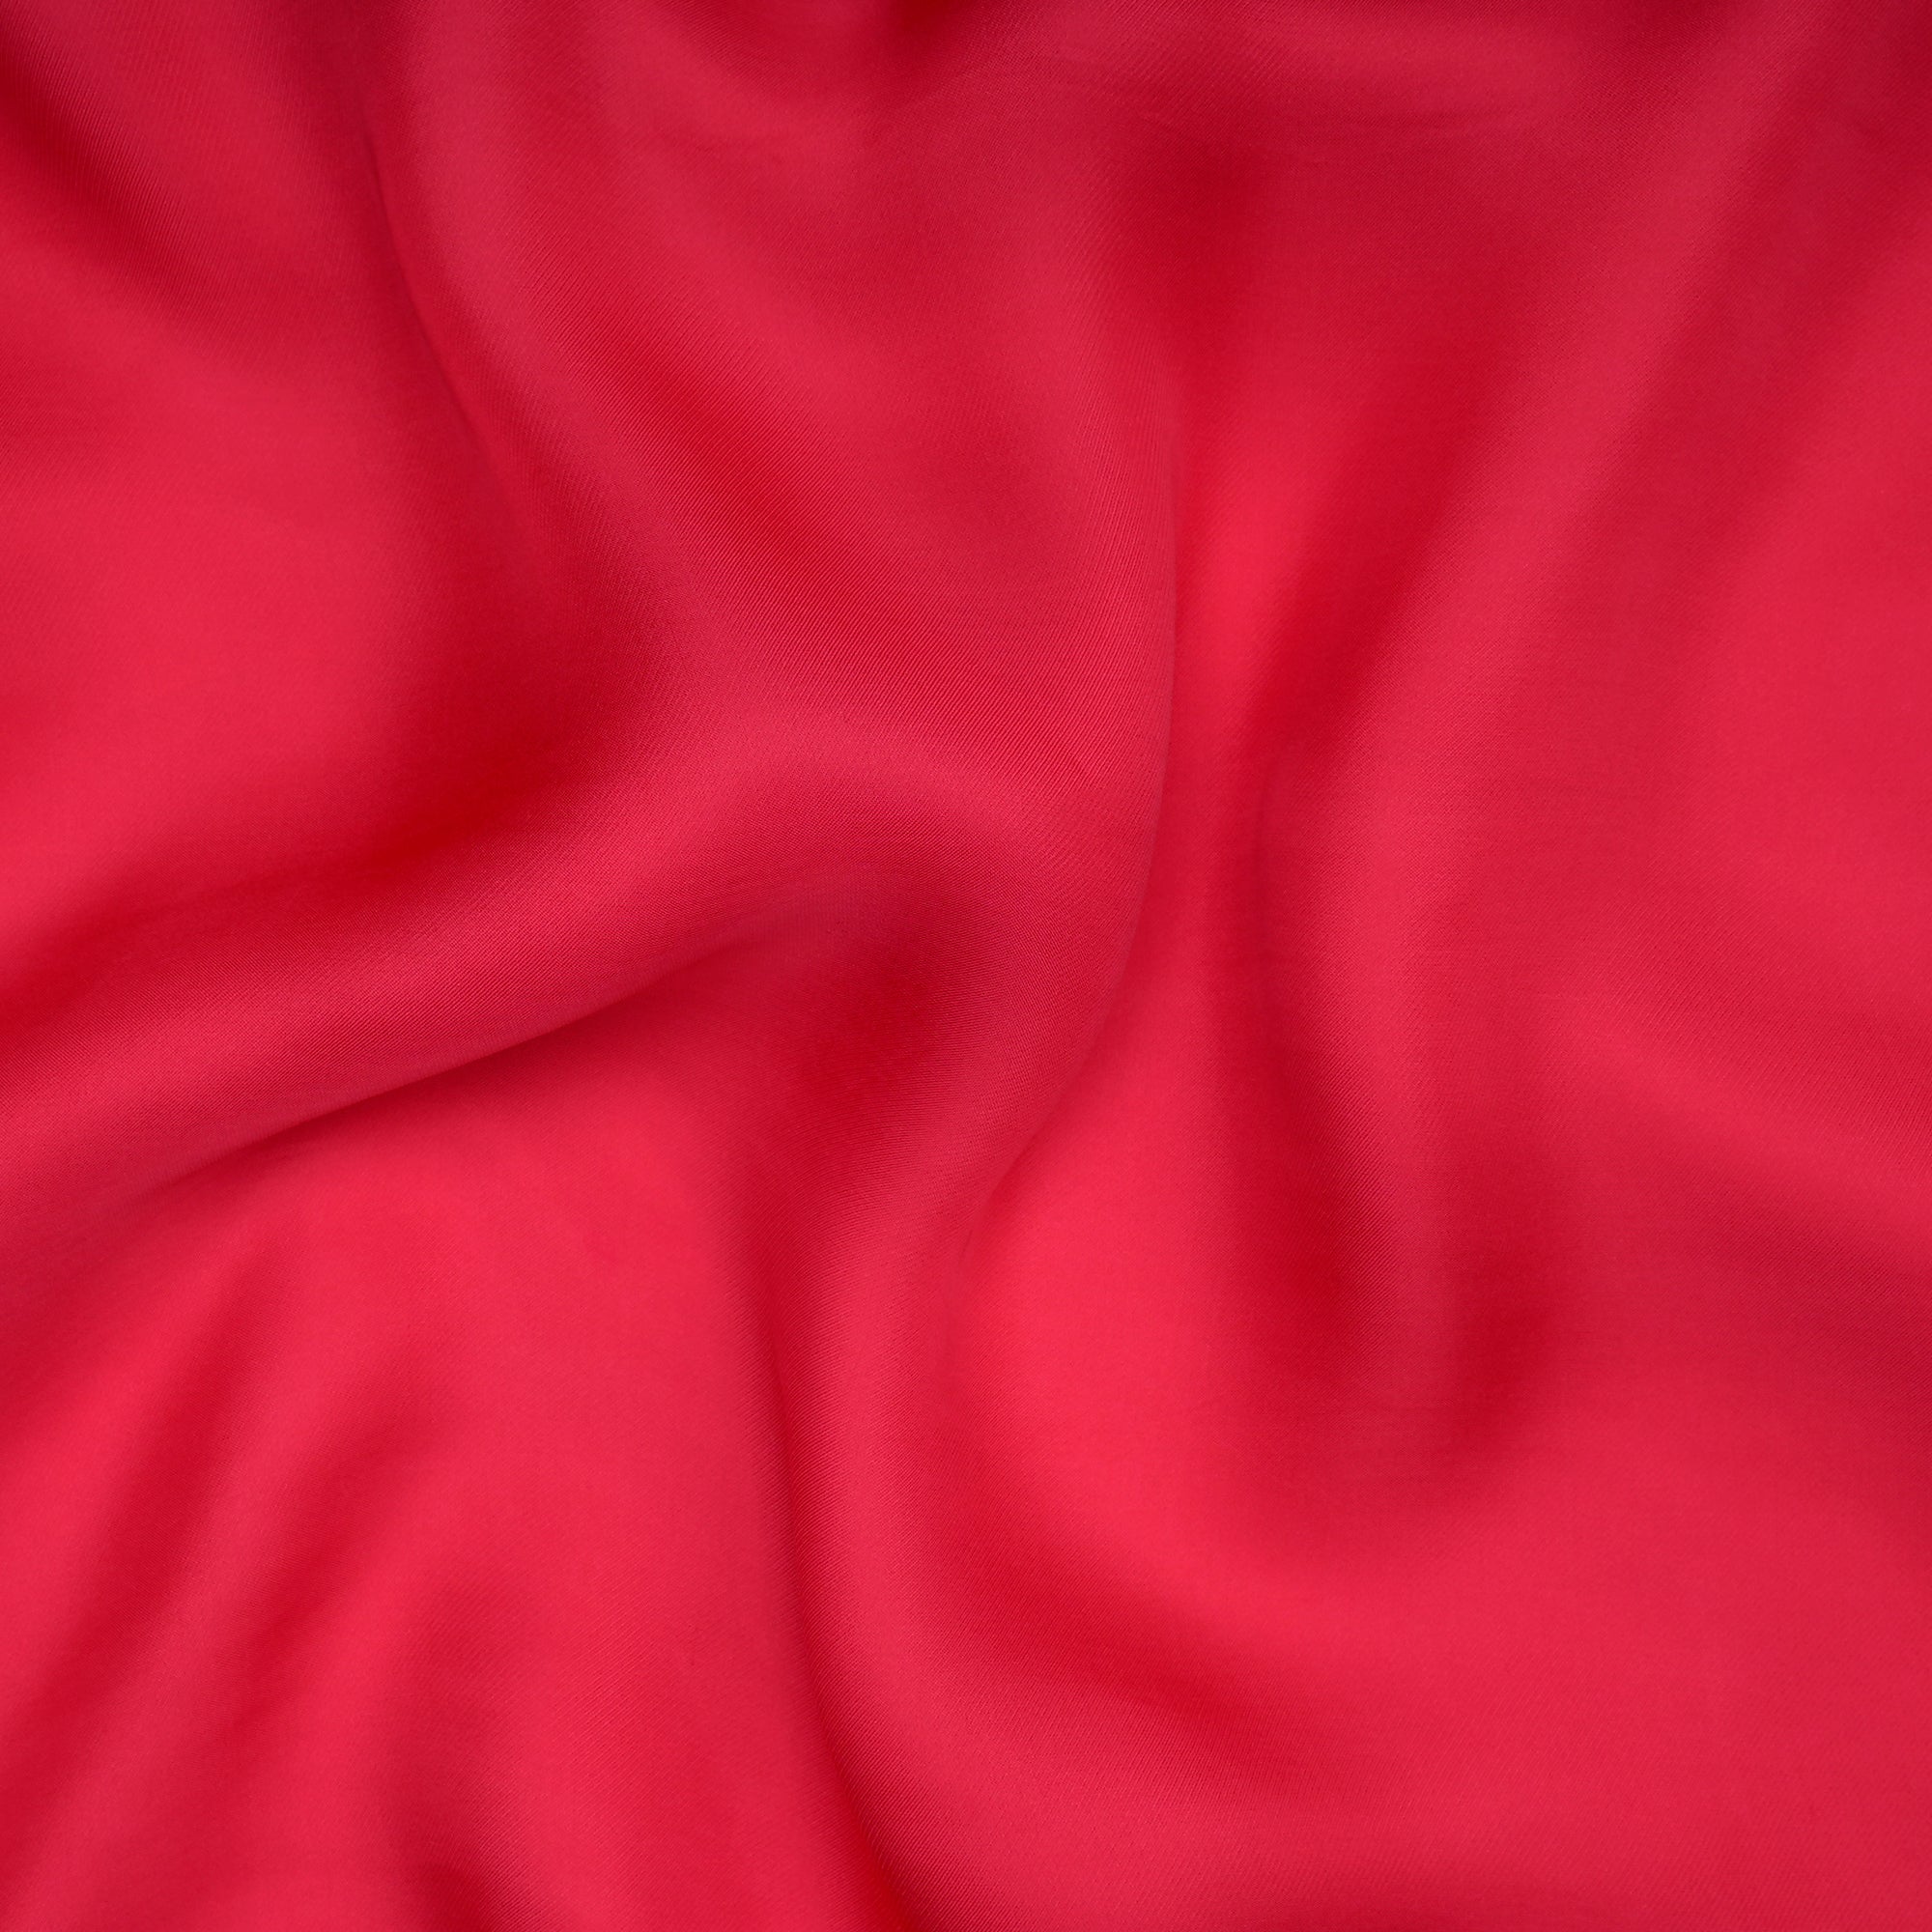 Hot Pink Mill Dyed Satin Organza Fabric